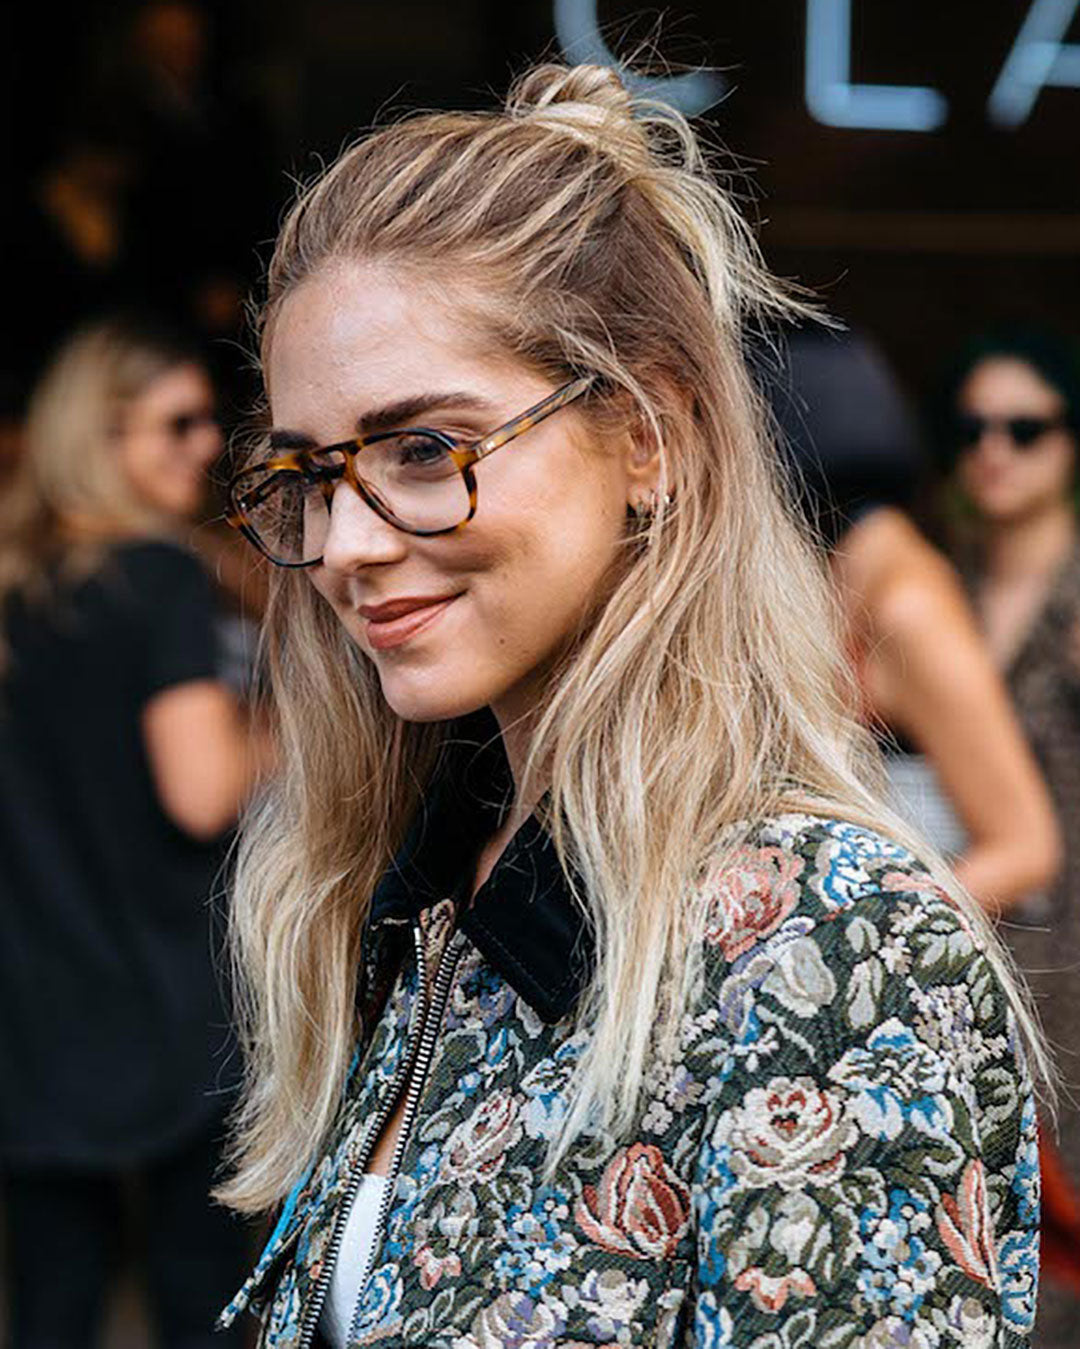 Three quarter view of blonde lady in floral top and large tortoise glasses frame